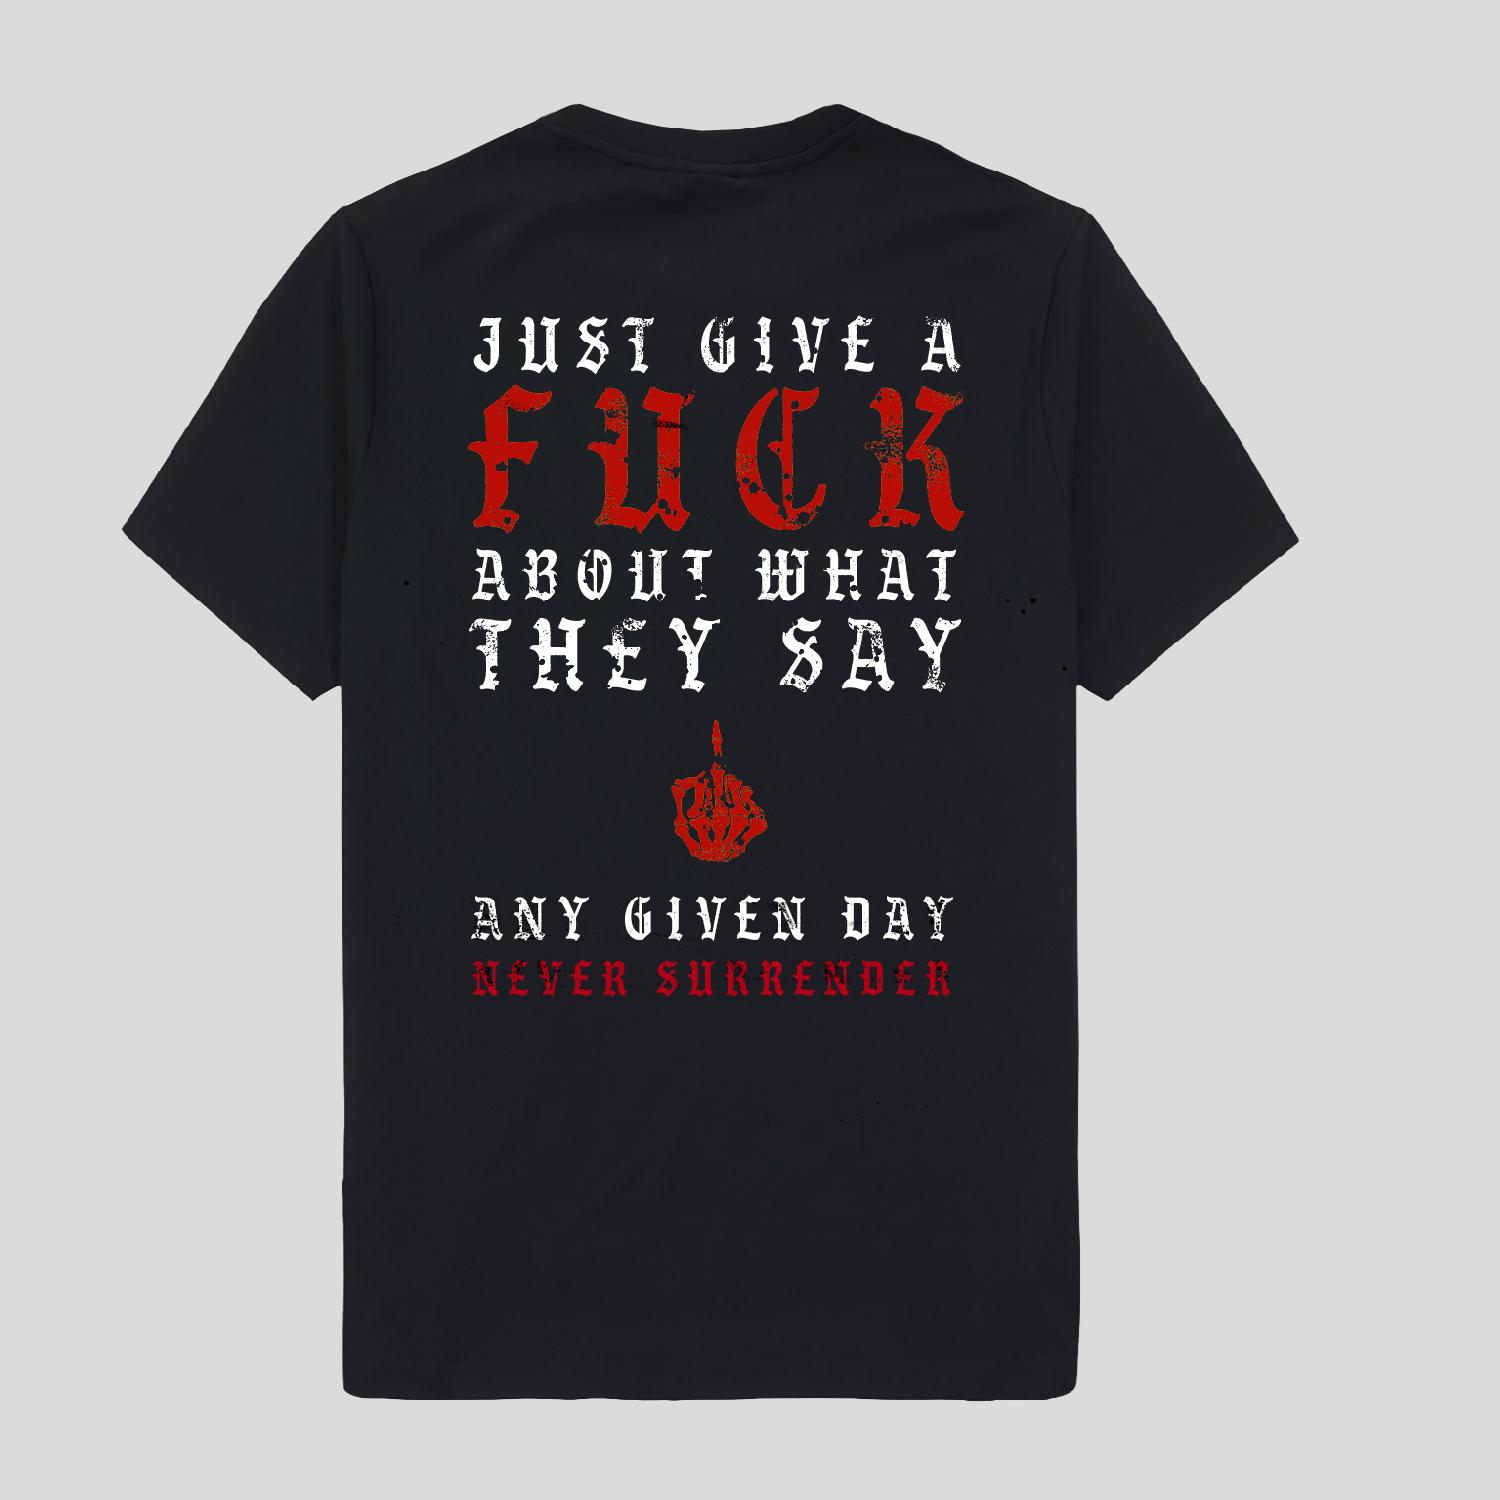 Any Given Day Never Surrender Shirt Black